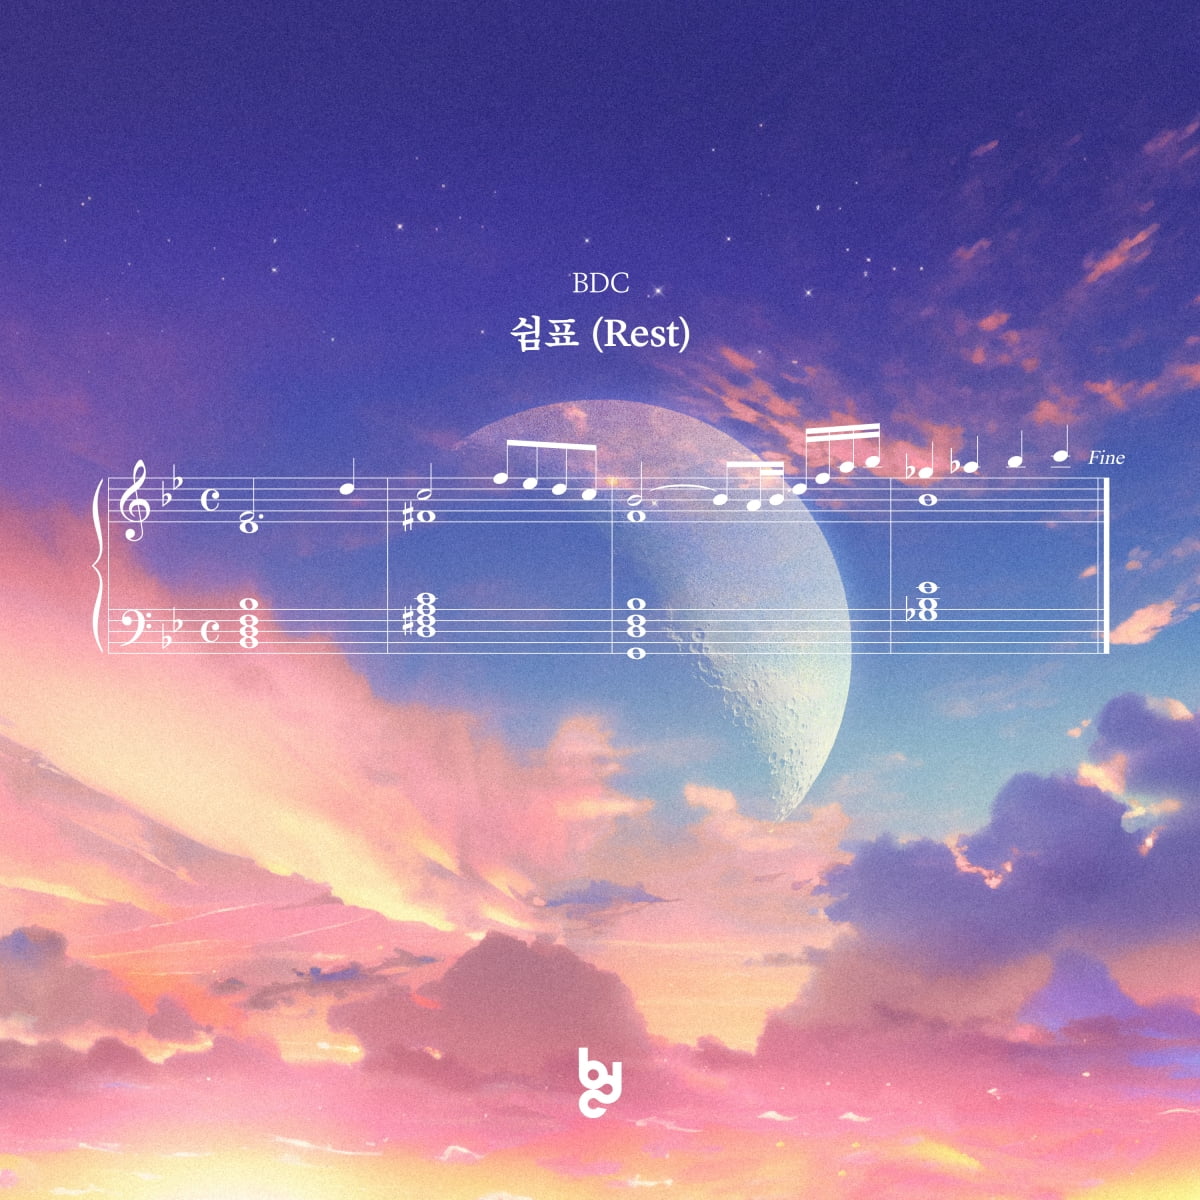 BDC releases goodbye single 'Rest' today (26th)... A comma to meet again